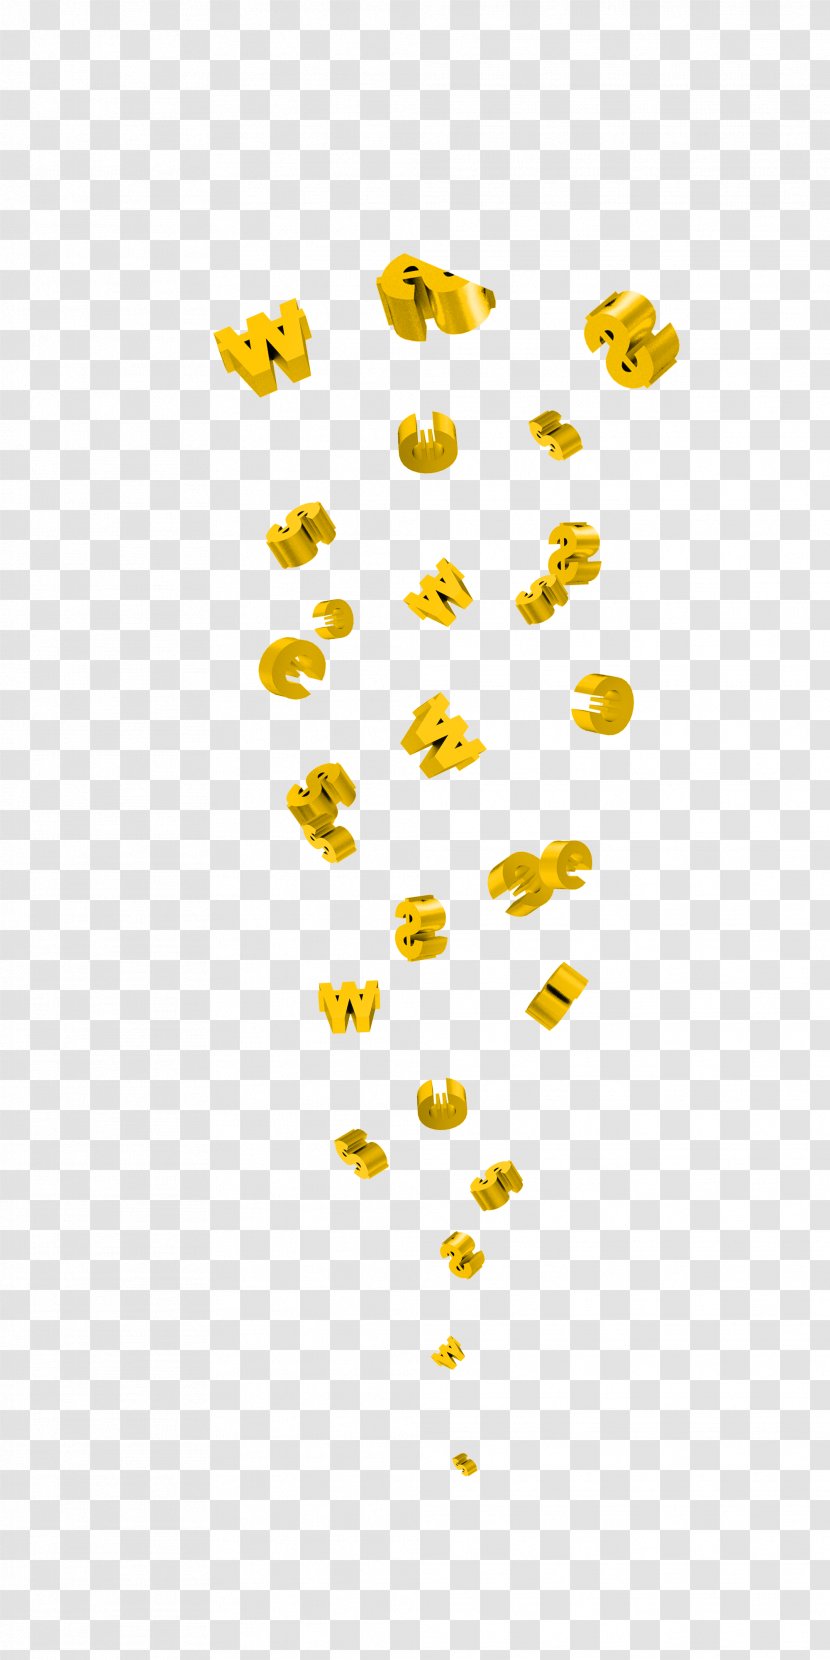 Euro Sign United States Dollar Symbol Finance - Company - Yellow Transparent PNG